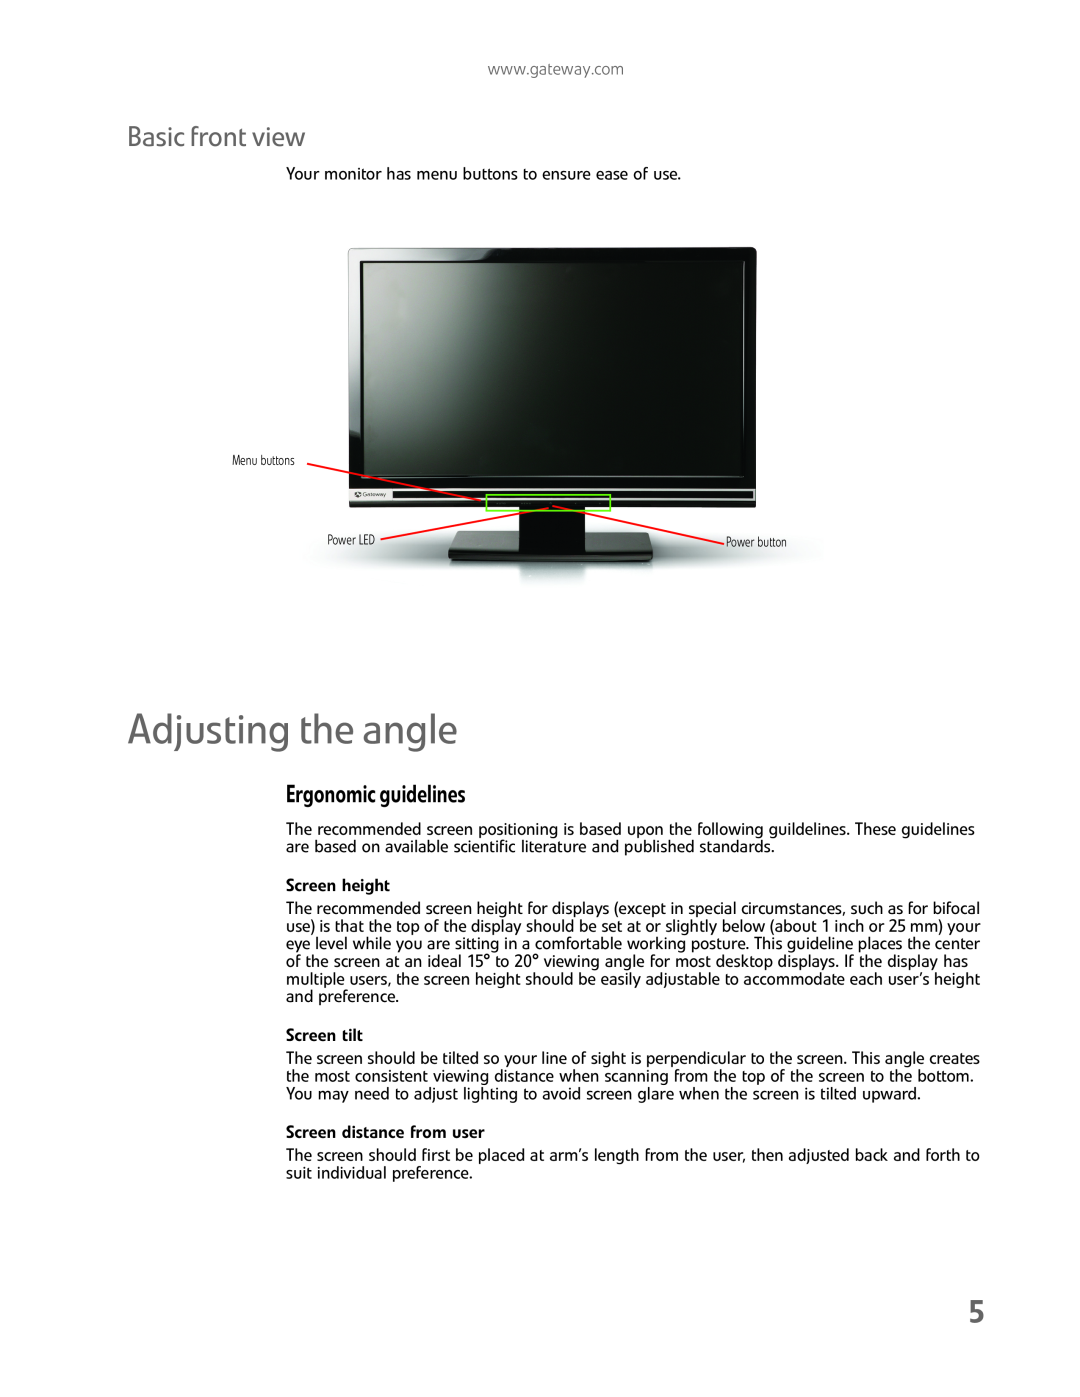 Gateway HD2202 manual Adjusting the angle, Basic front view, Ergonomic guidelines 